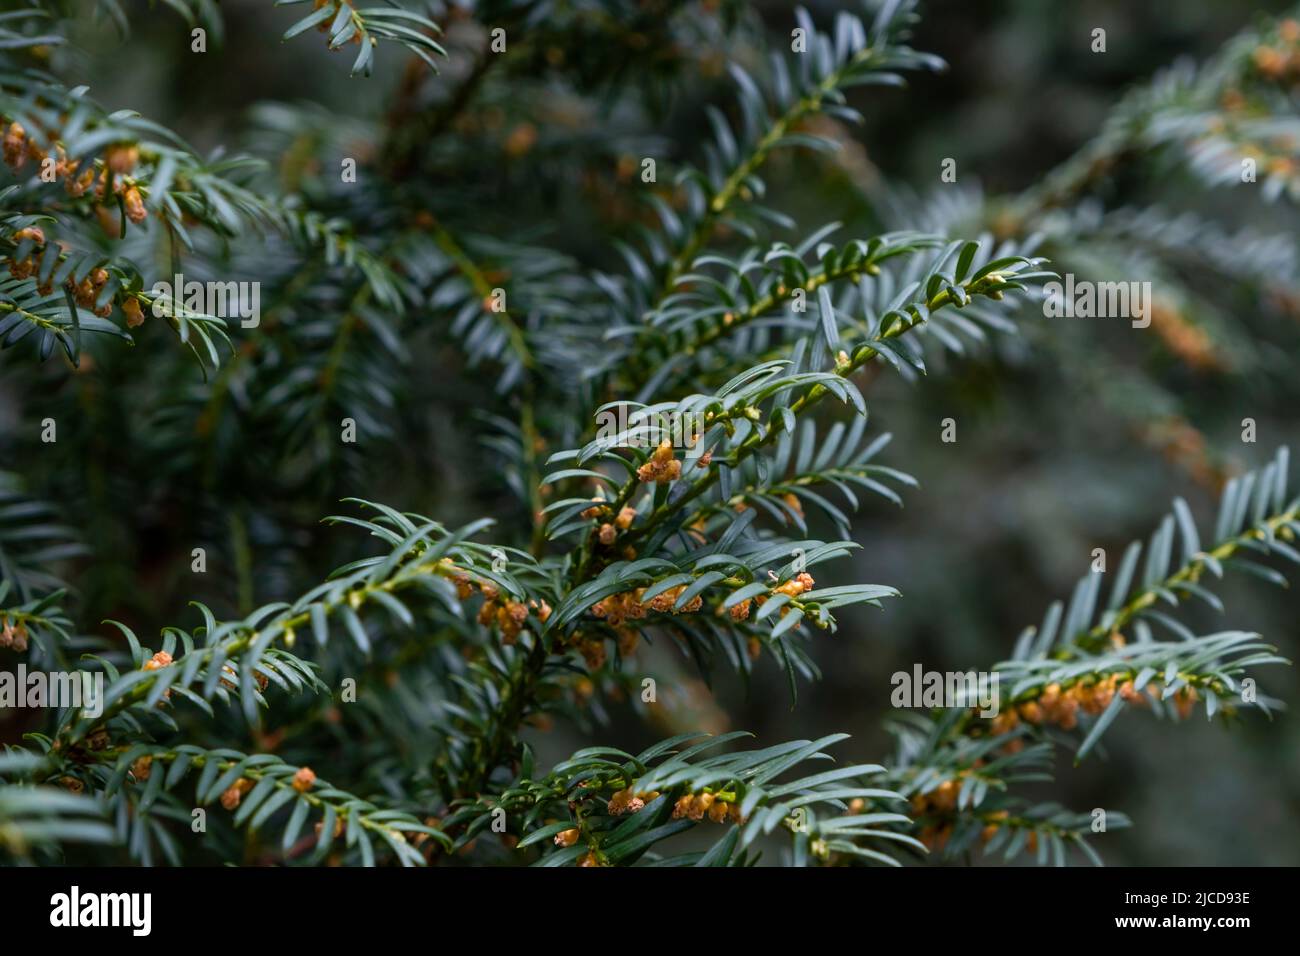 Taxus Baccata or European yew dark green foliage and male flowers Stock Photo